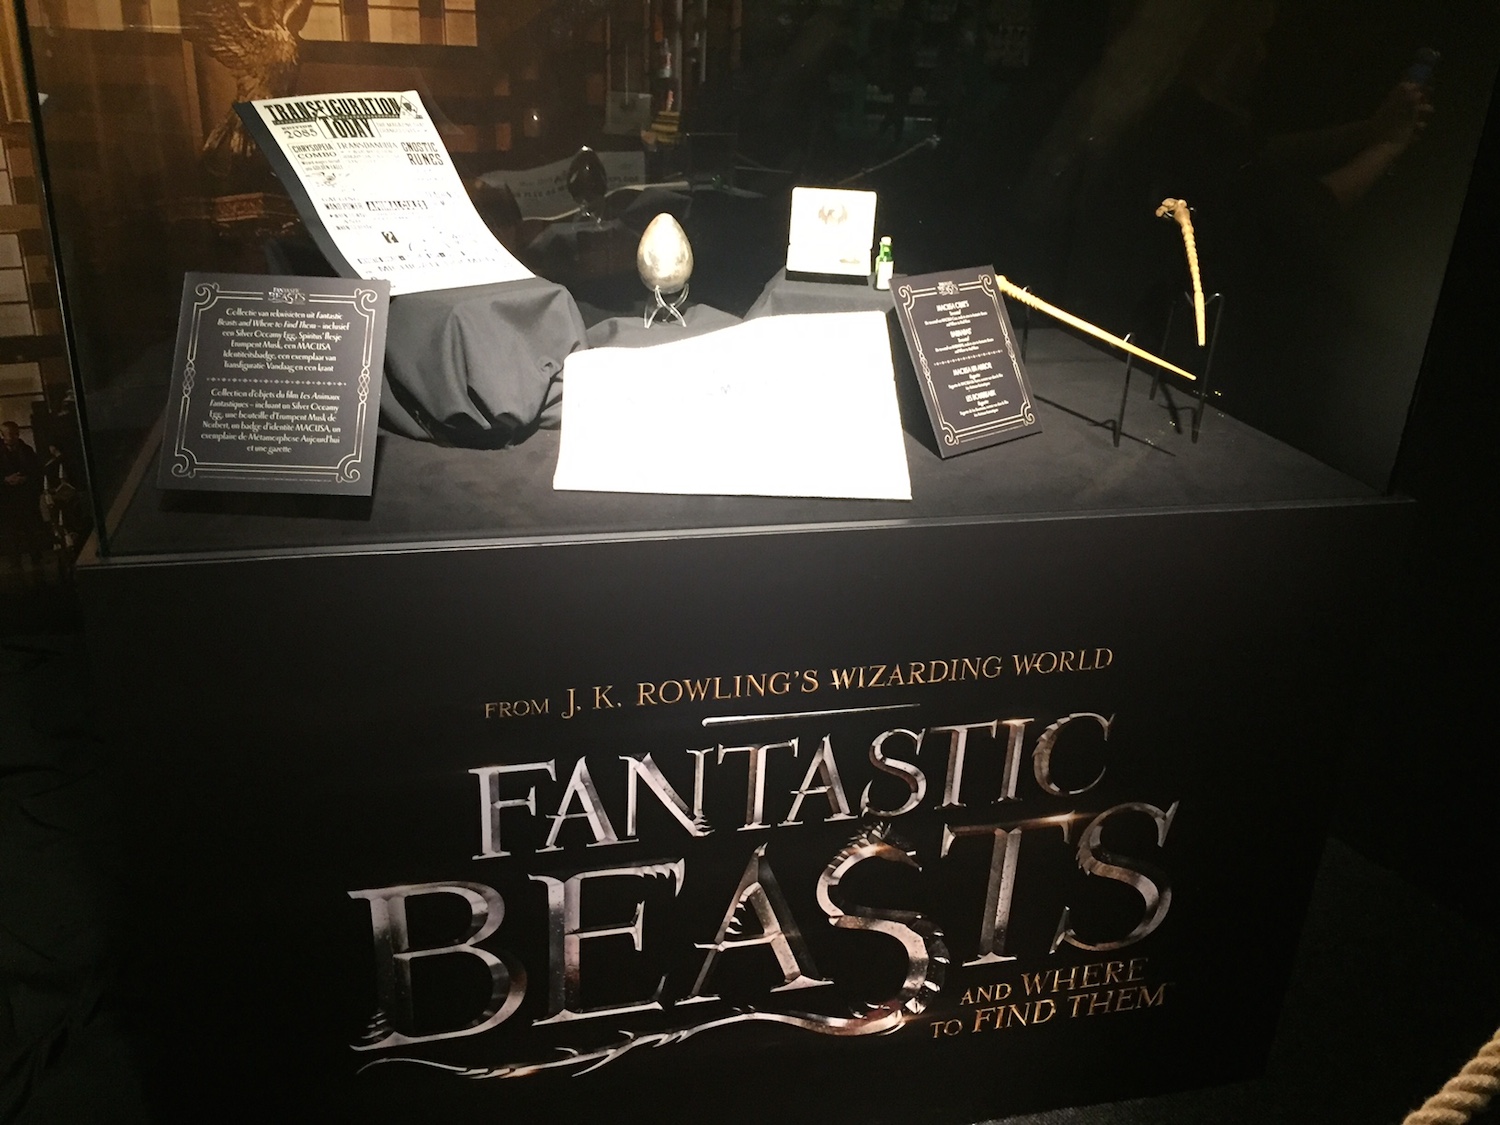 Props from “Fantastic Beasts and Where to Find Them”